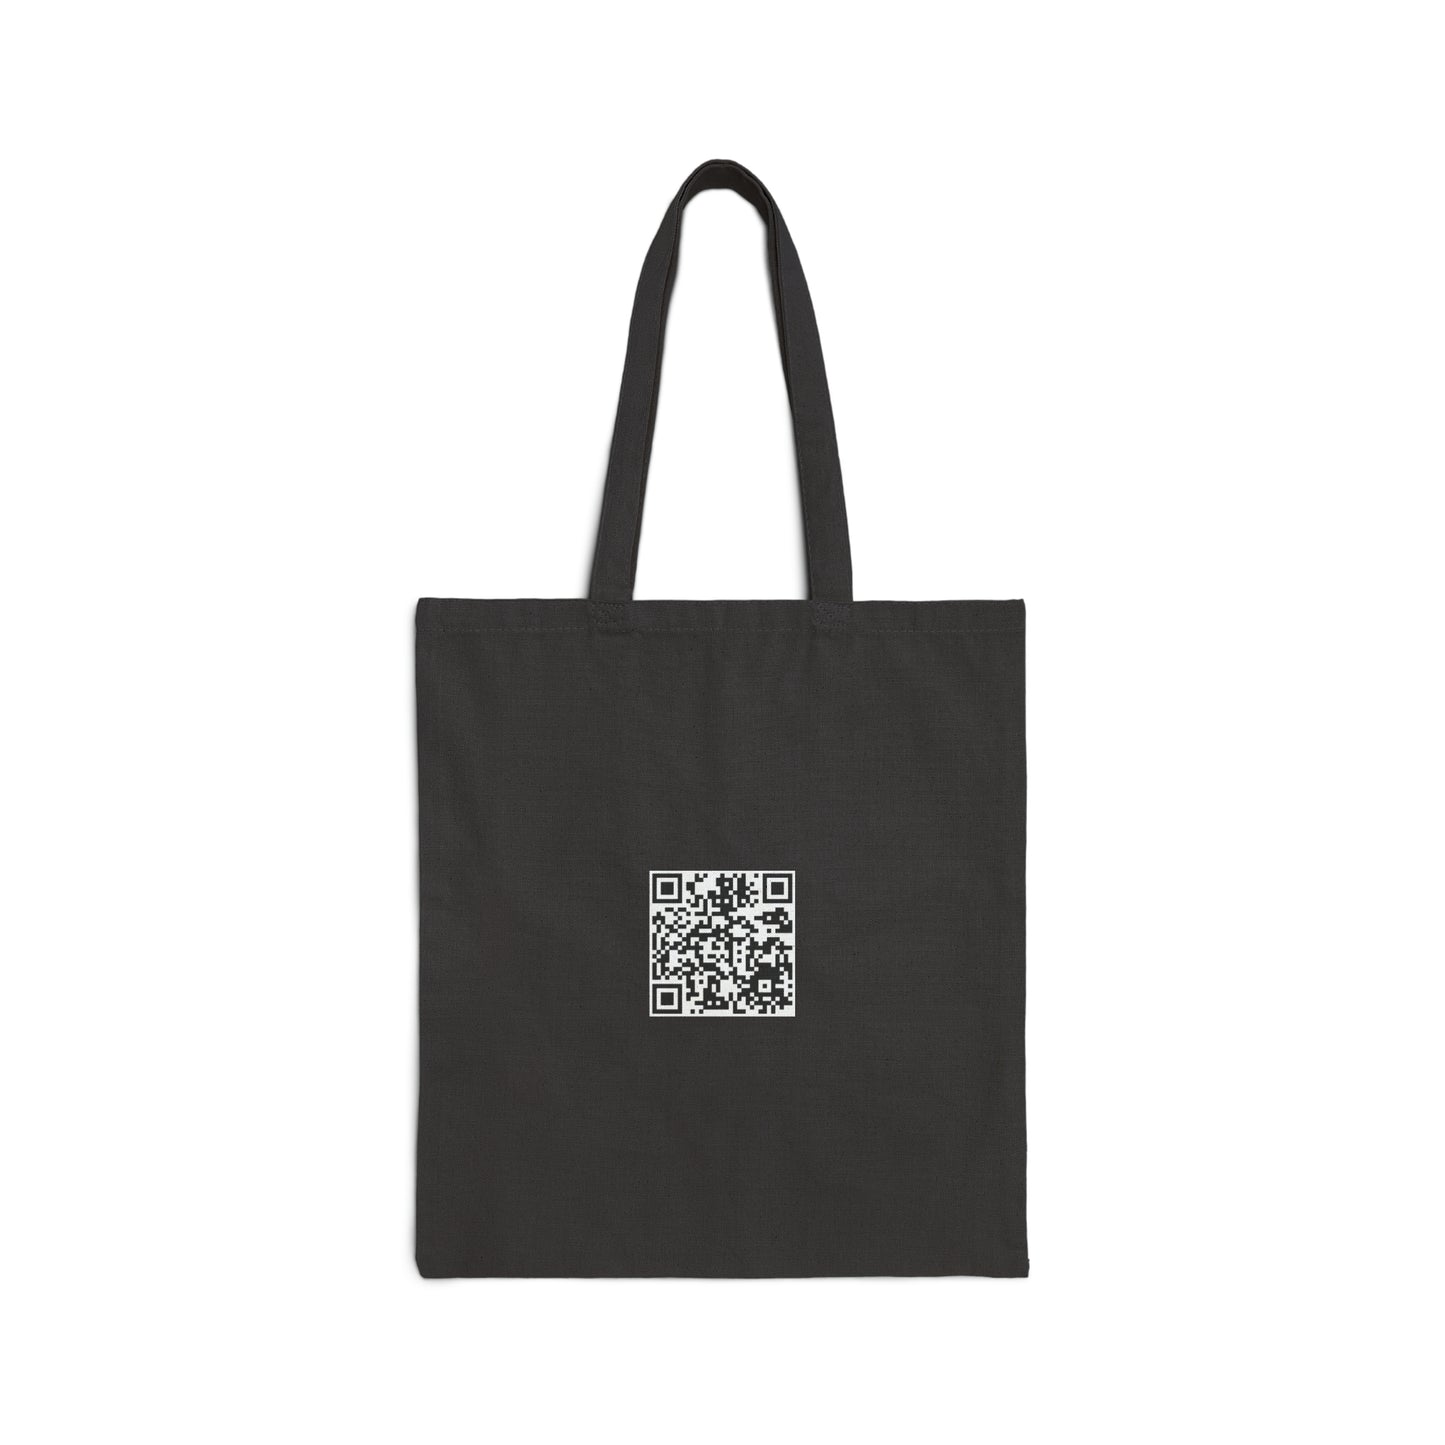 Irony In The Soul - Cotton Canvas Tote Bag